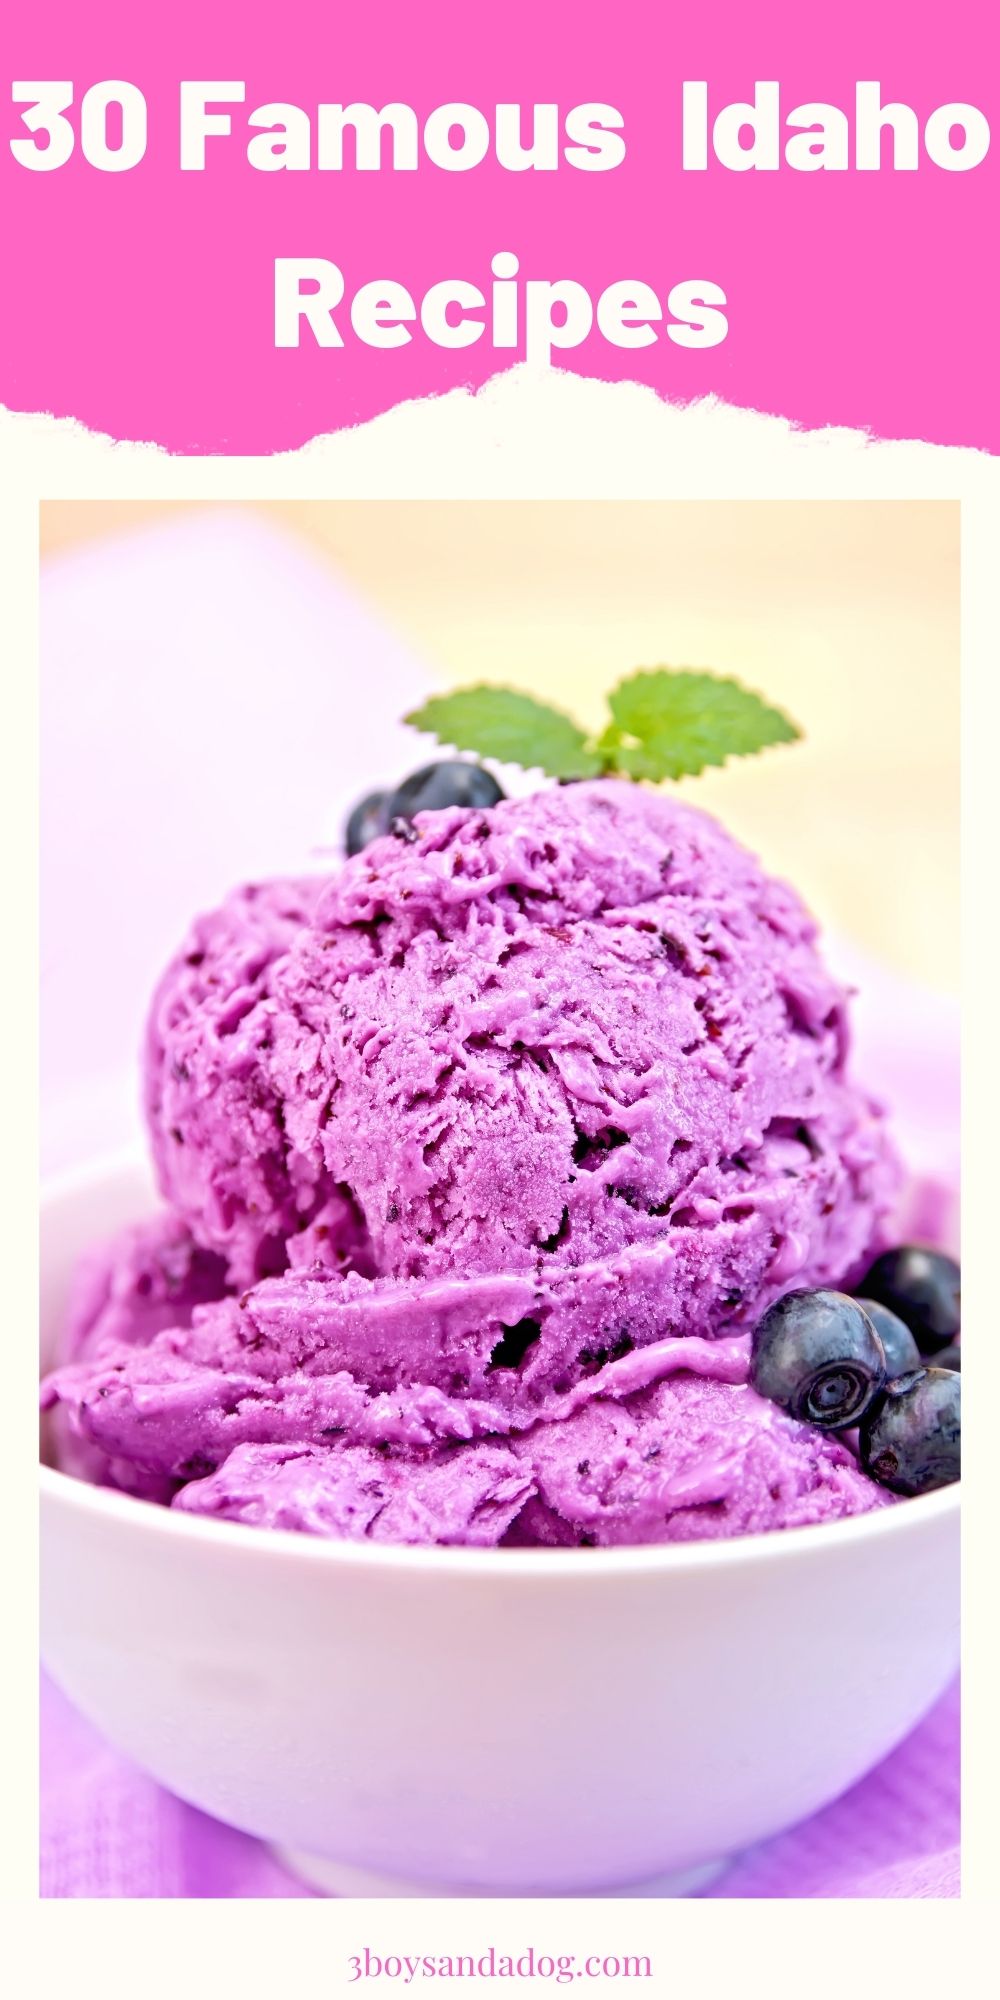 pin image with "30 Famous Idaho Recipes" and a photo of huckleberry ice cream in a white bowl